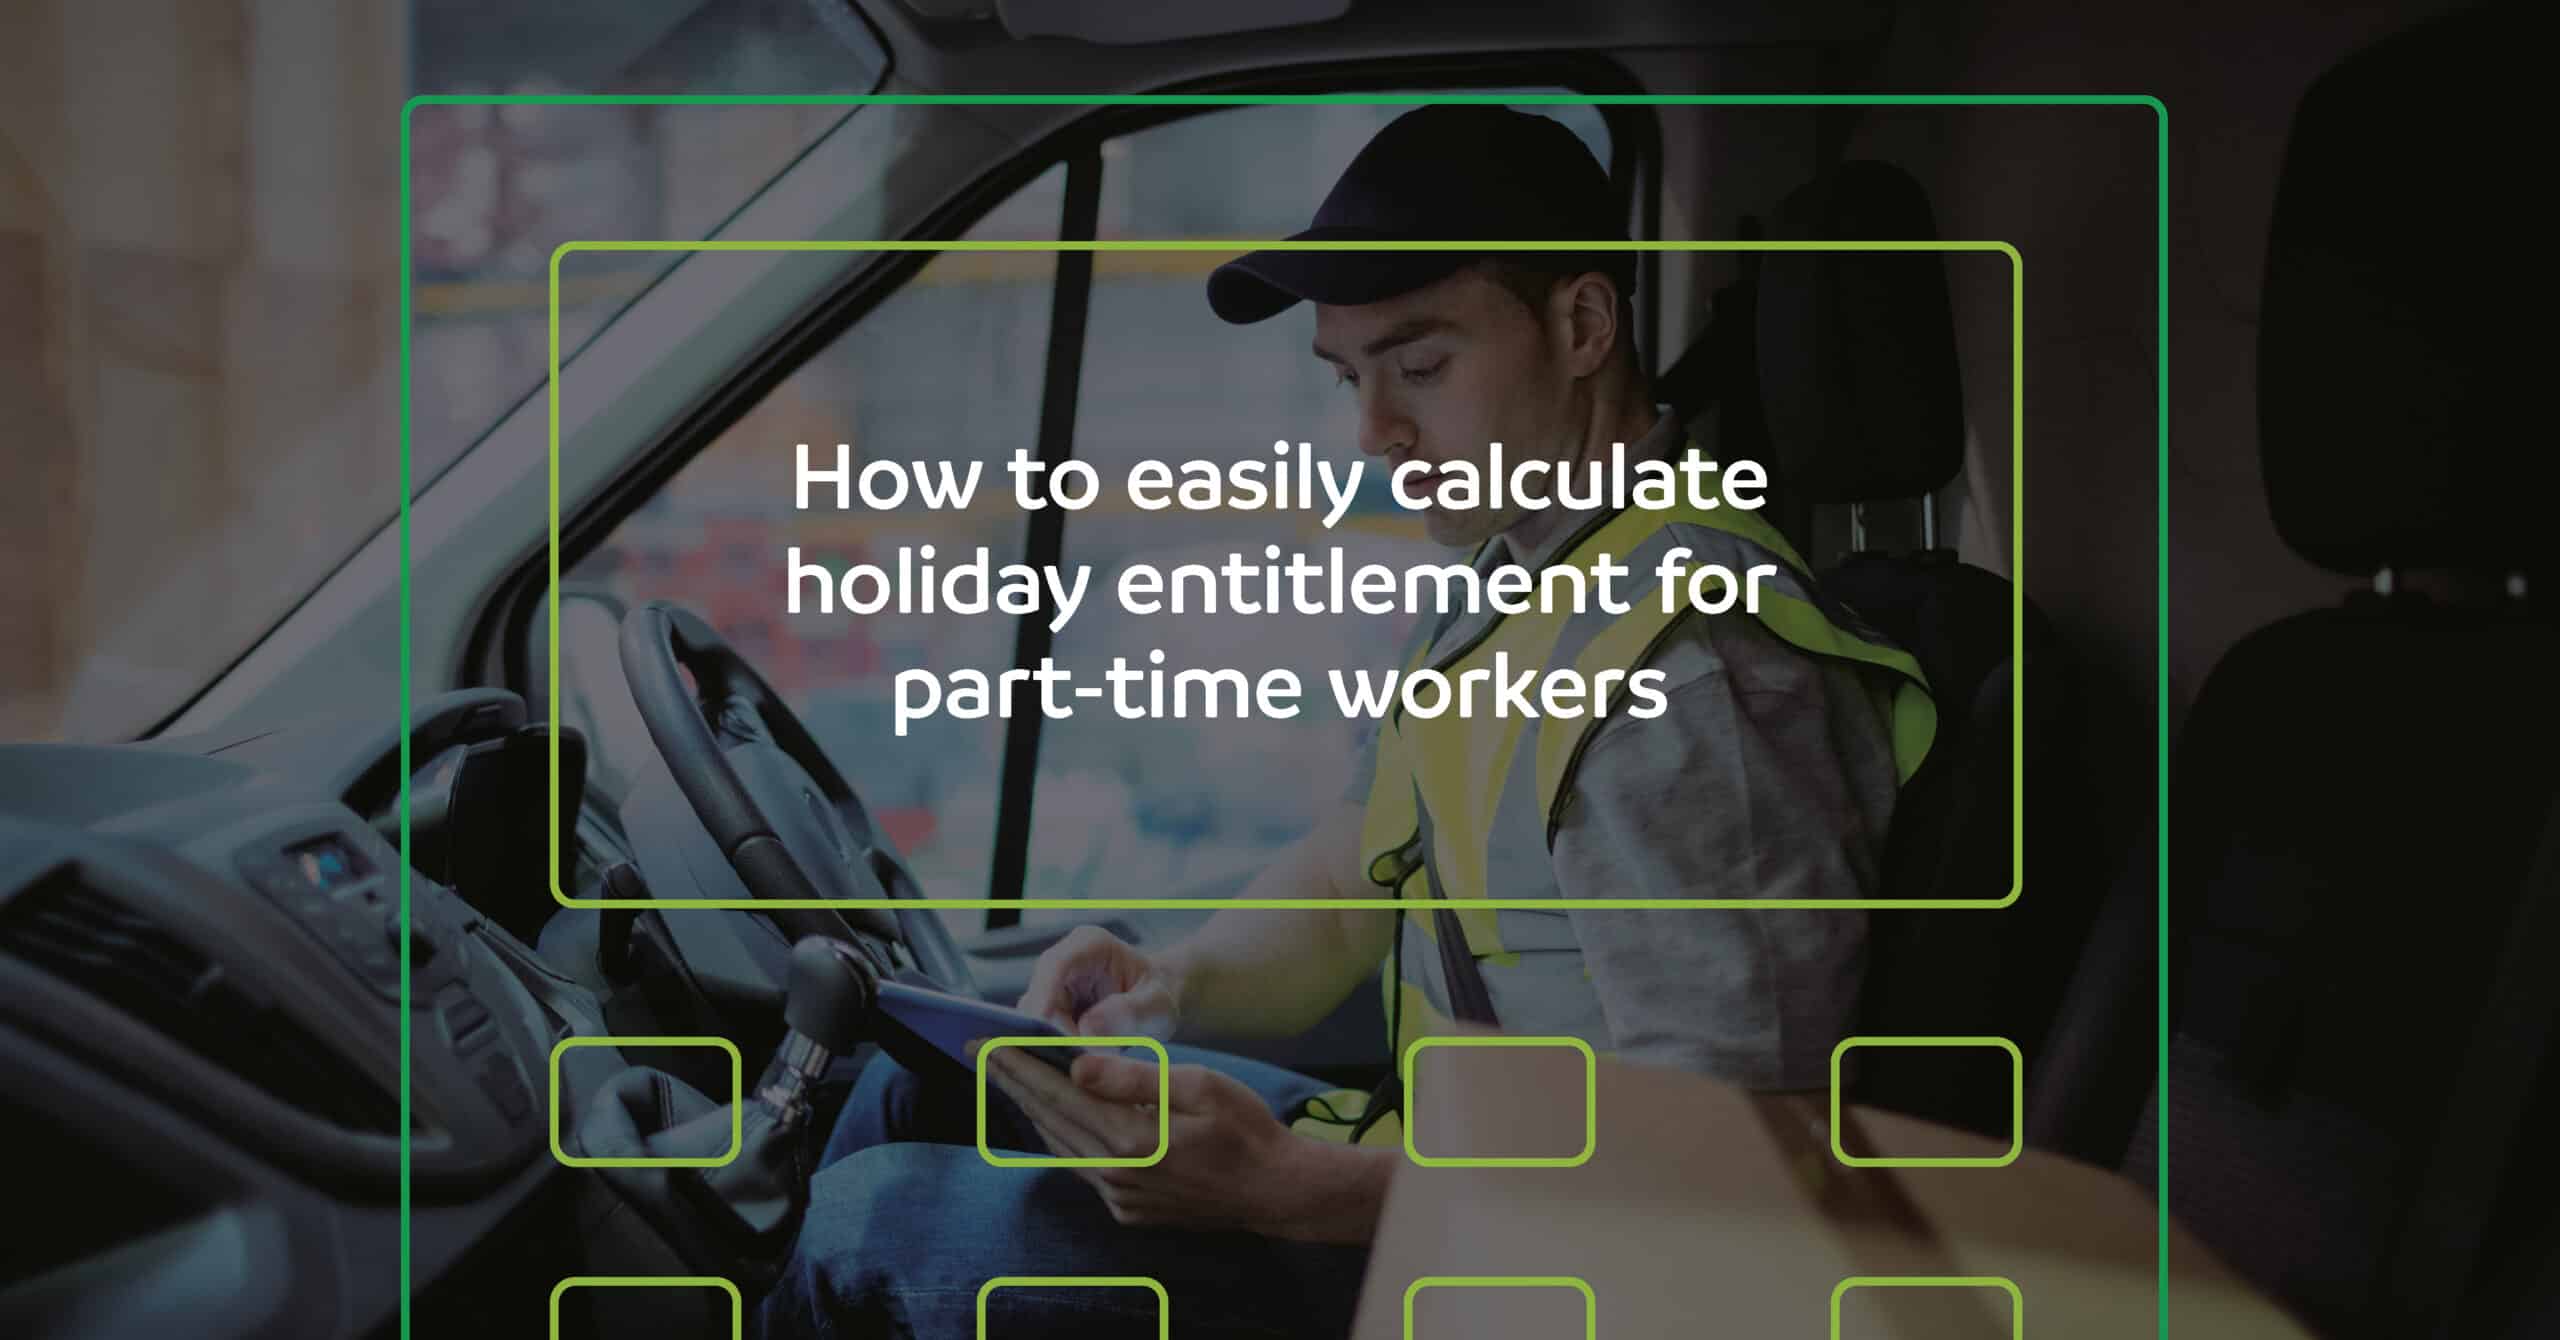 Easily calculate part-time workers' holiday entitlement